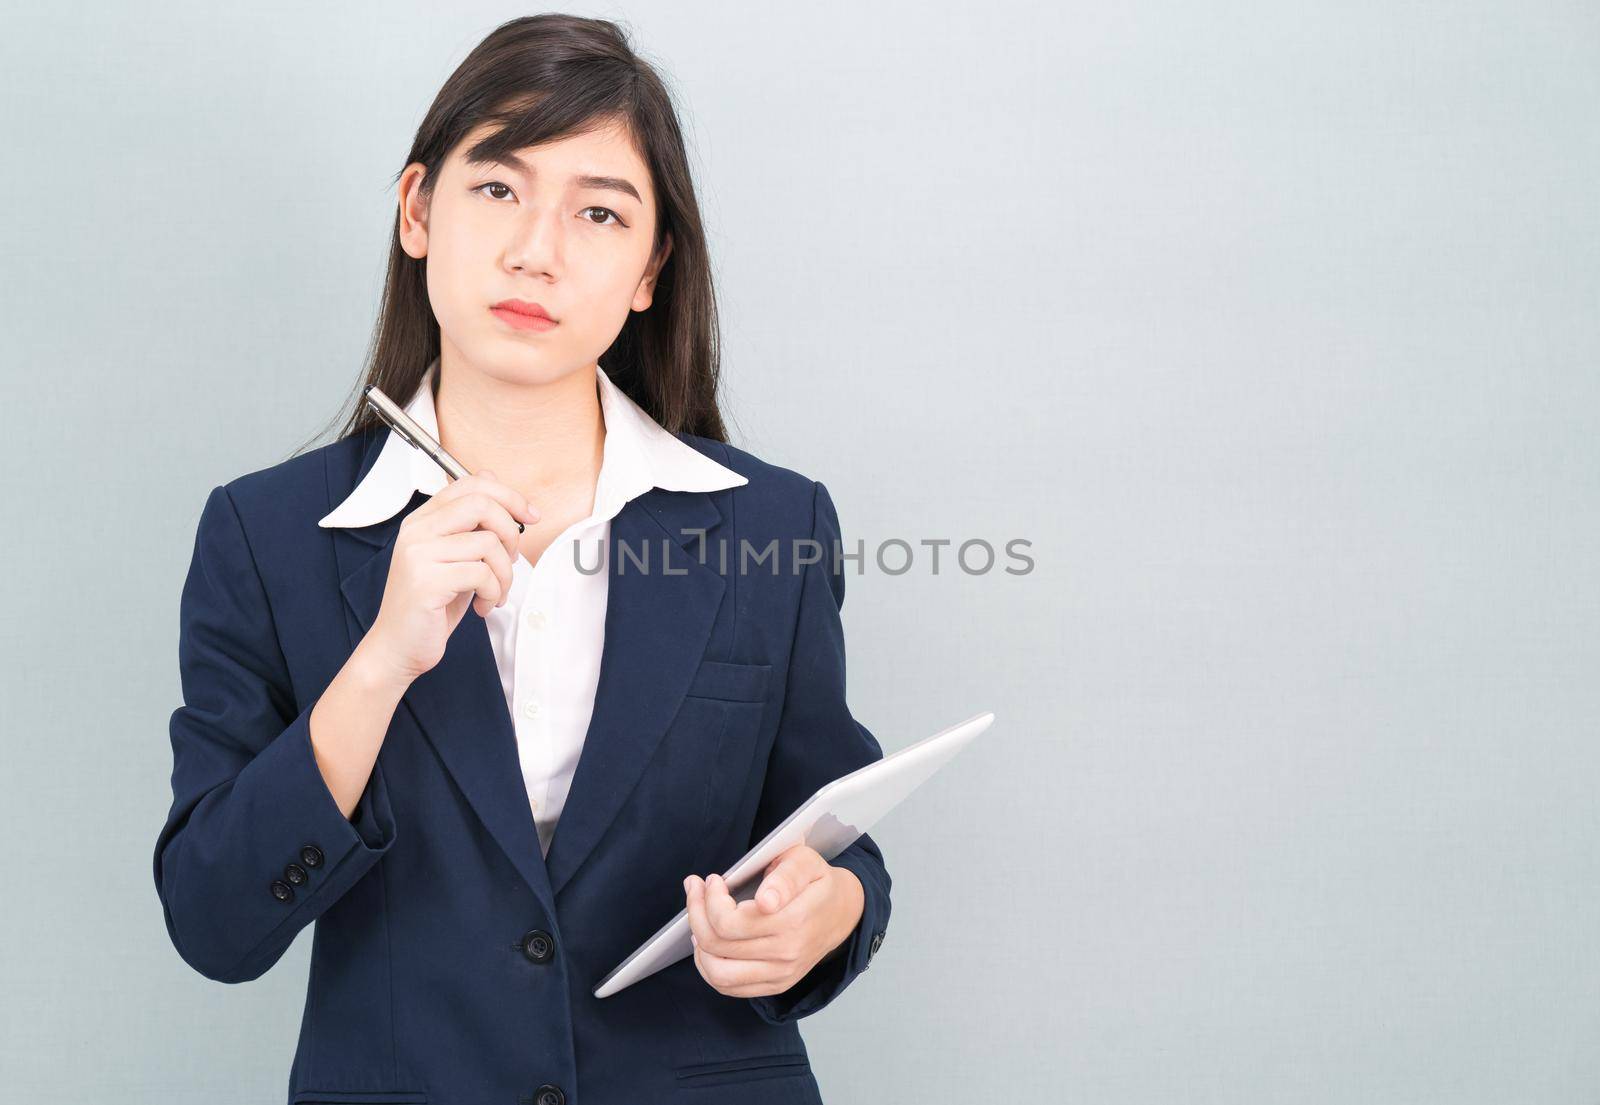 Woman in suit using digital tablet on gray background by stoonn